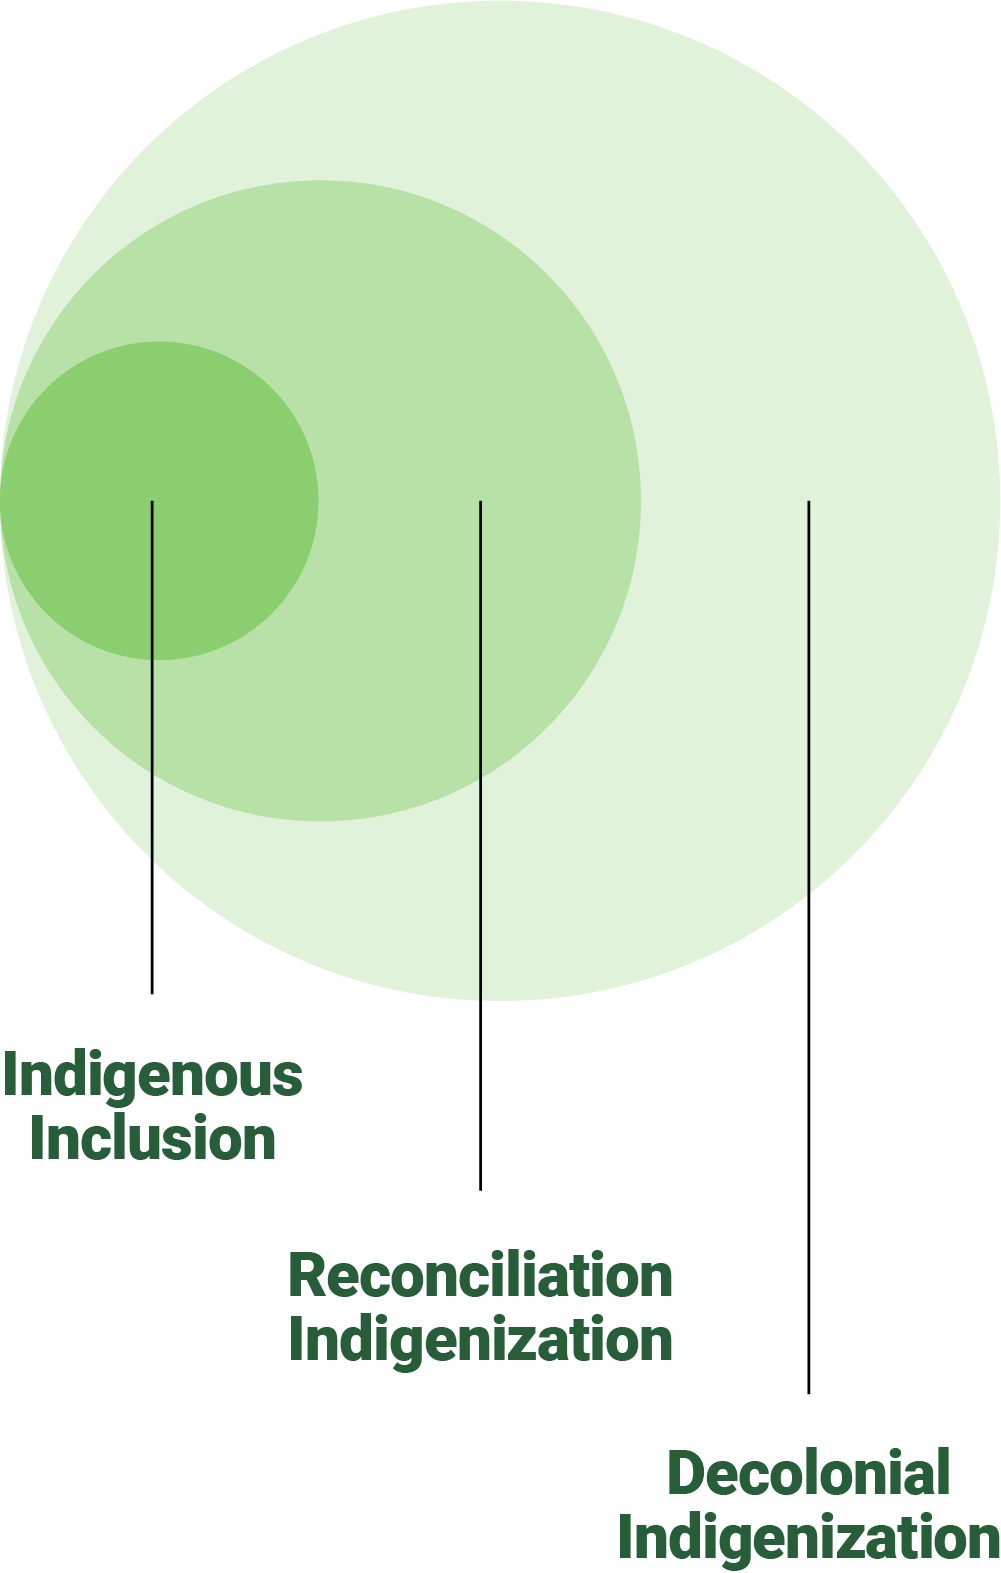 Three circles depicting Gaudry and Lorenz’s spectrum of indigenization, moving from Indigenous inclusion on the inside to reconciliation indigenization and finally to decolonial indigenization.